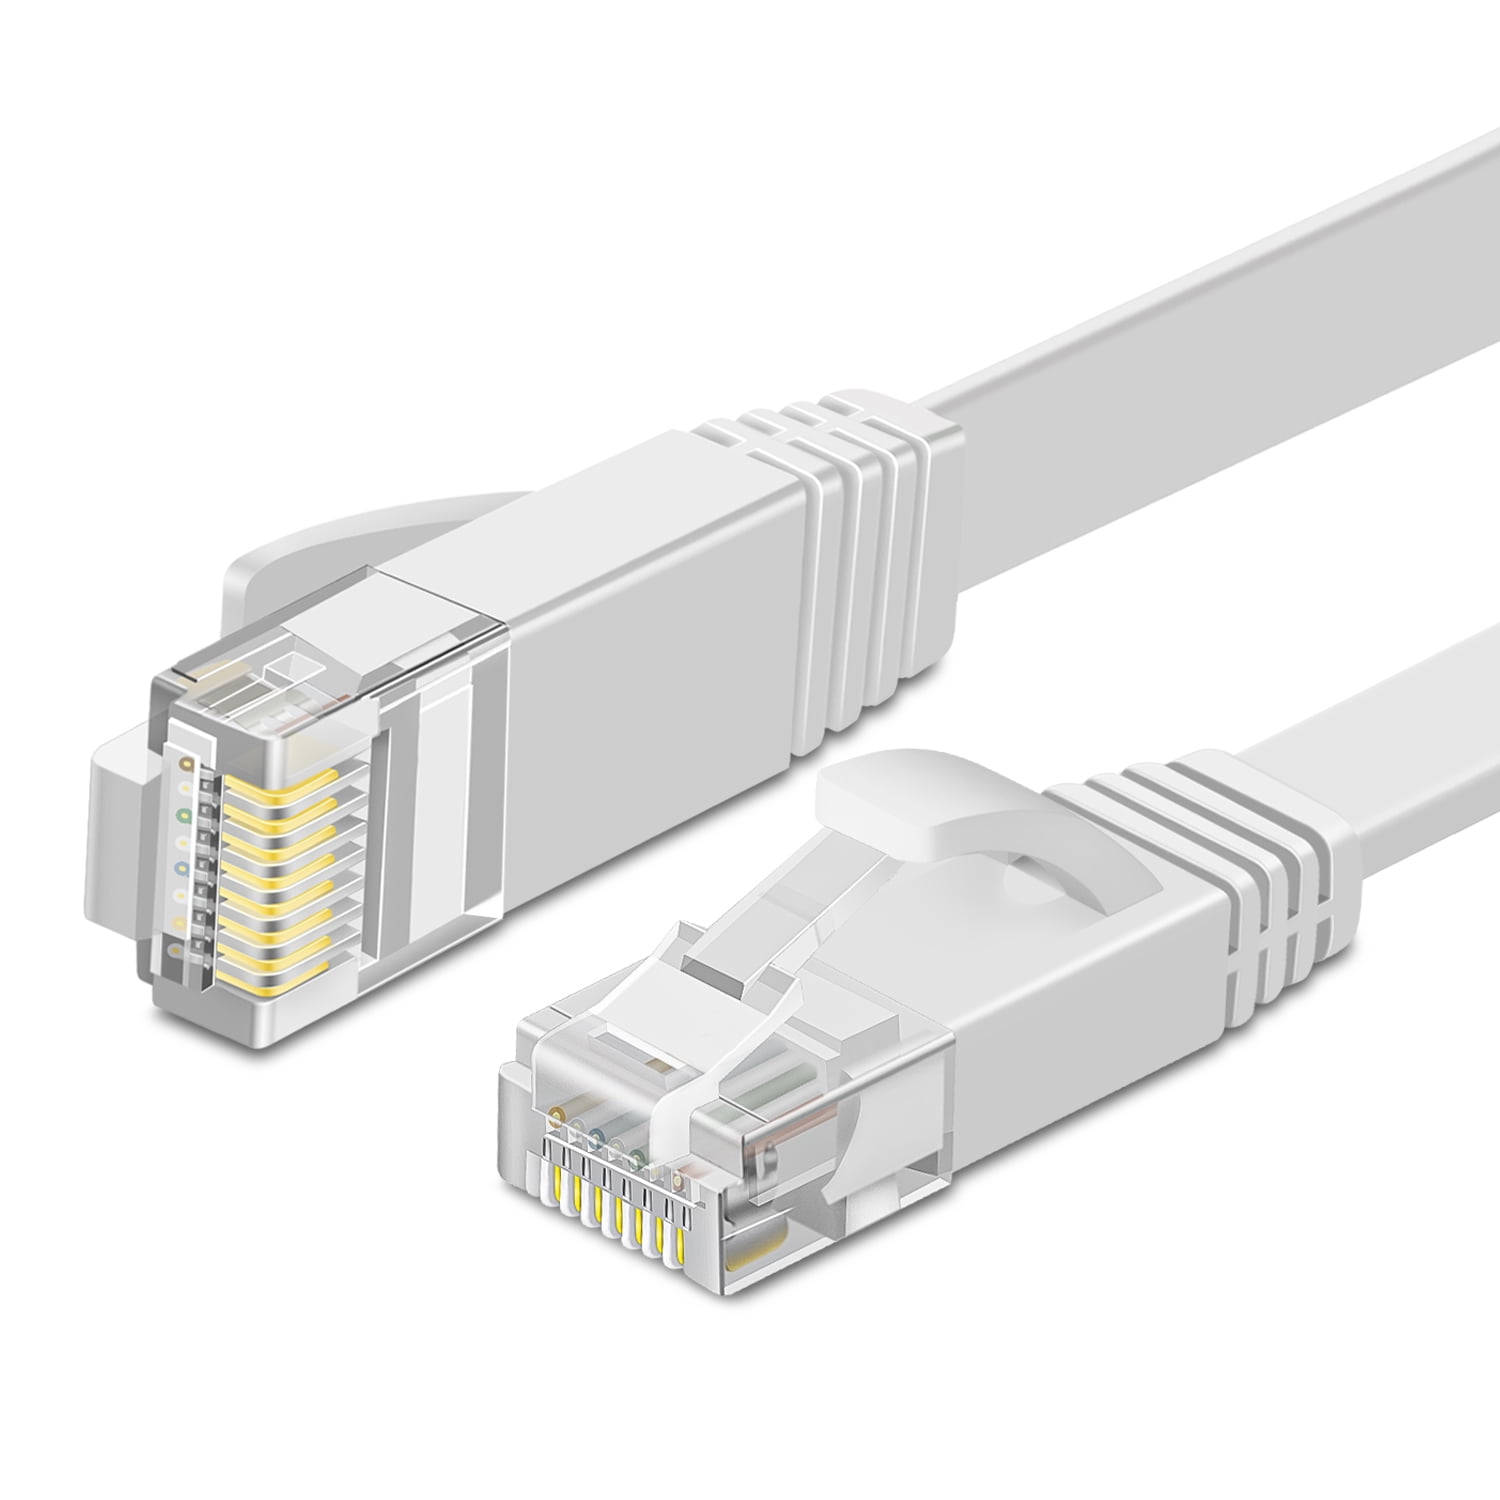 Cat6 Internet Network Cable Flat,Ethernet Patch Cables Short,Computer LAN Cable with Snagless RJ45 Connectors Cat 6 Ethernet Cable Mixed Color 5 Pack 